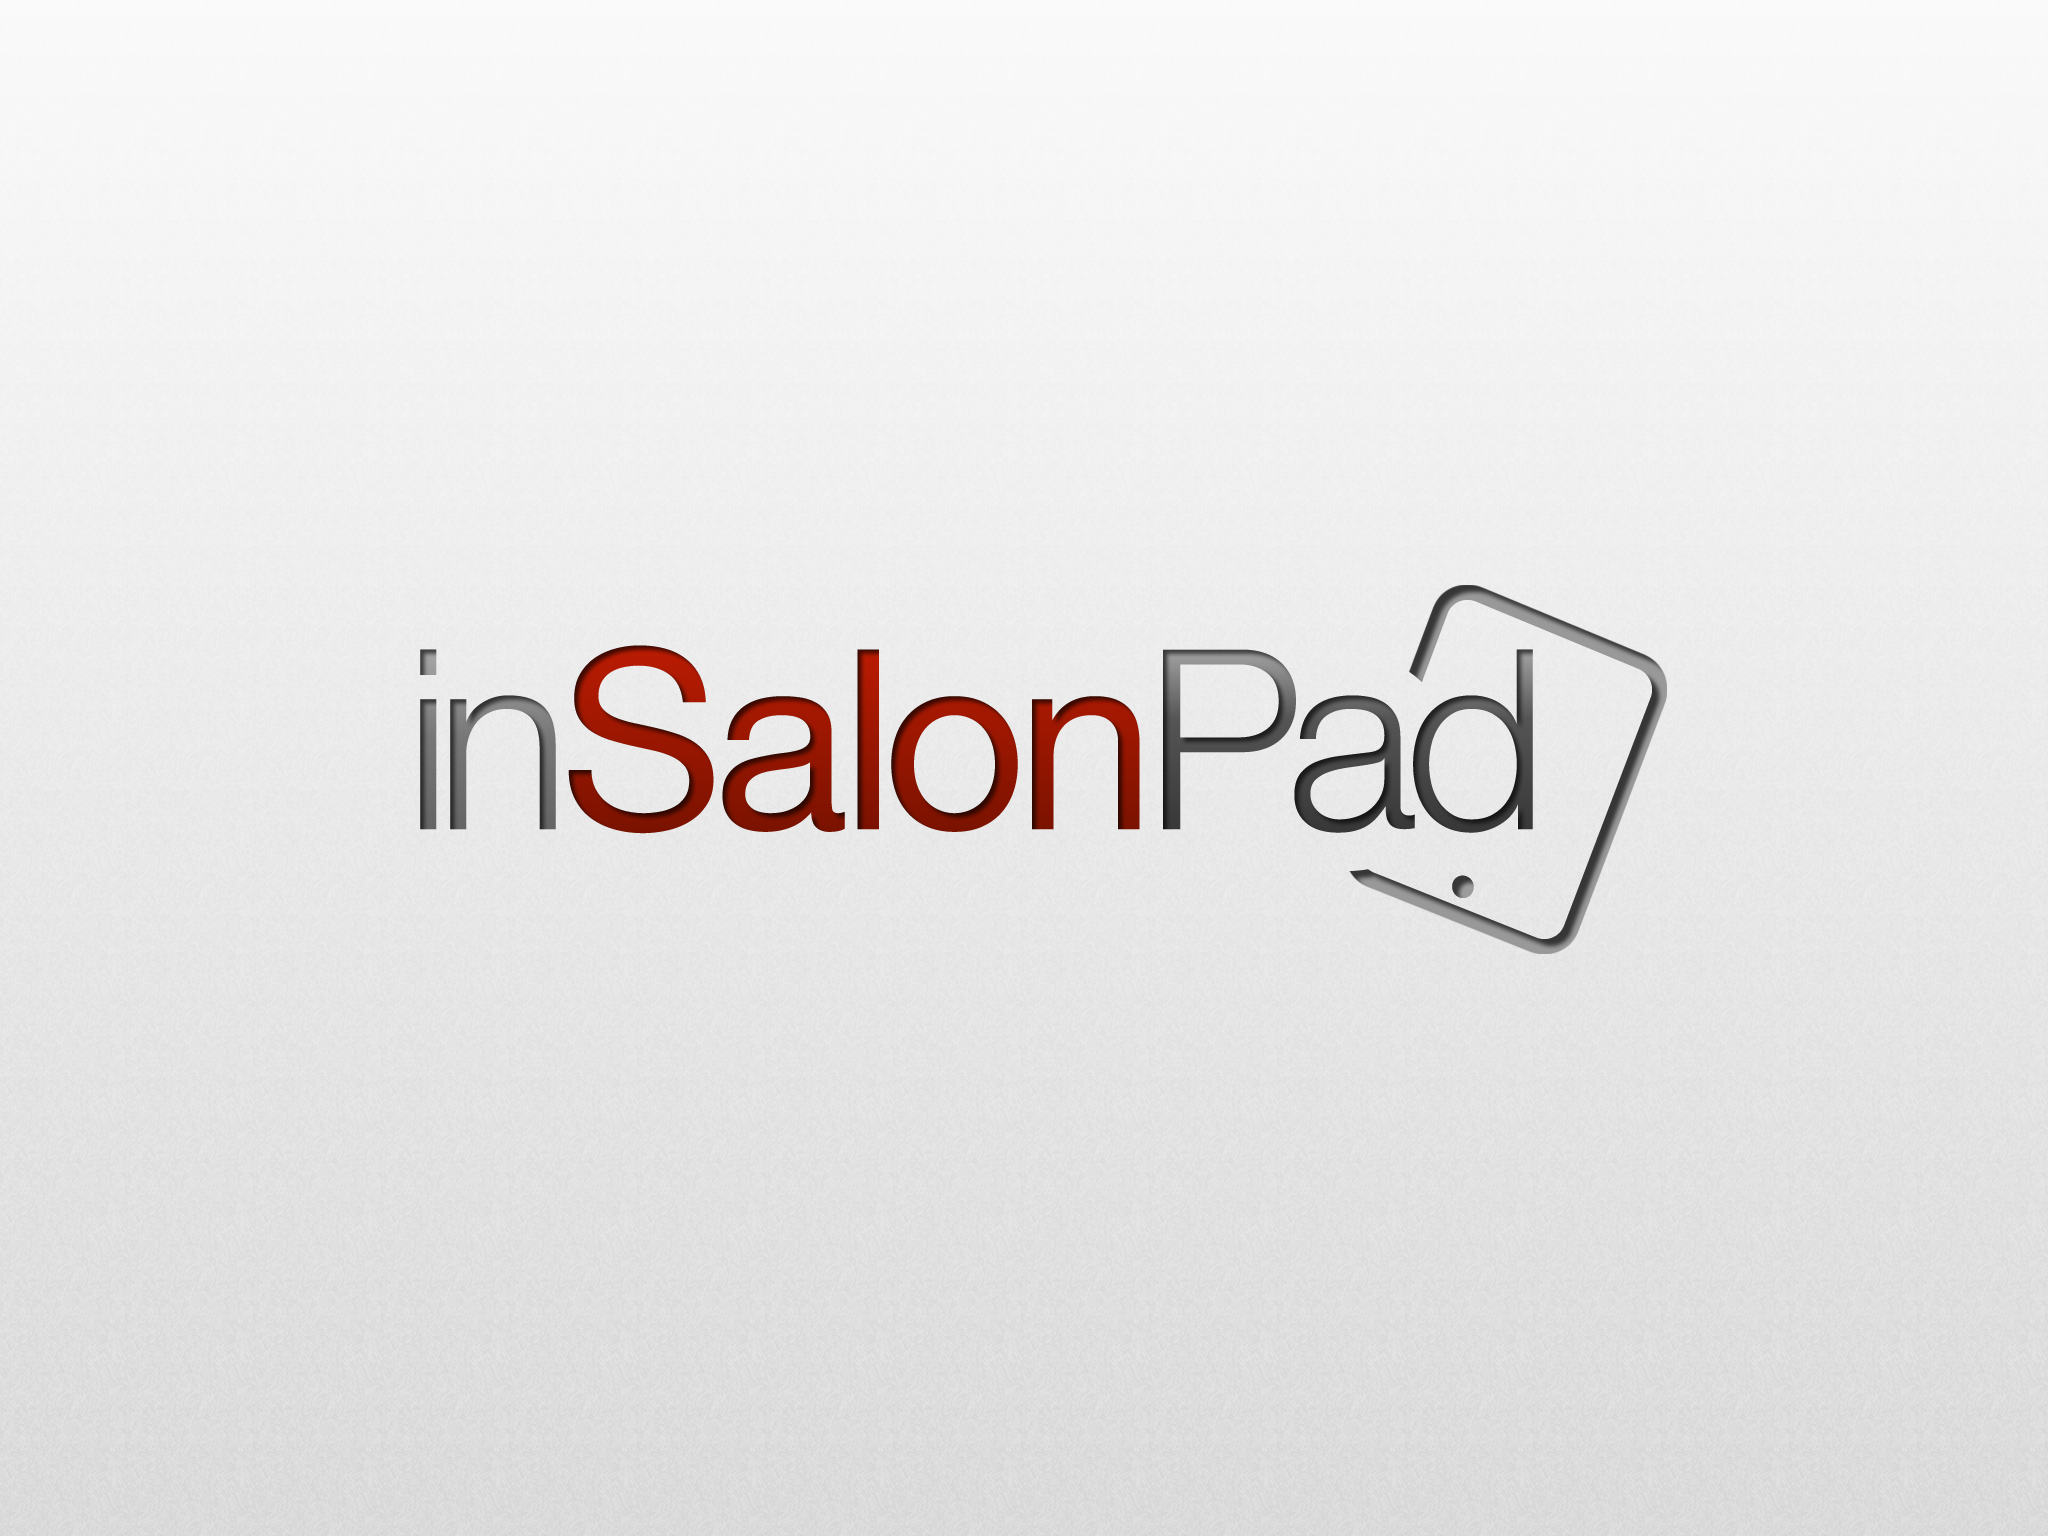 inSalonPad: enhance the shopping experience with tablets